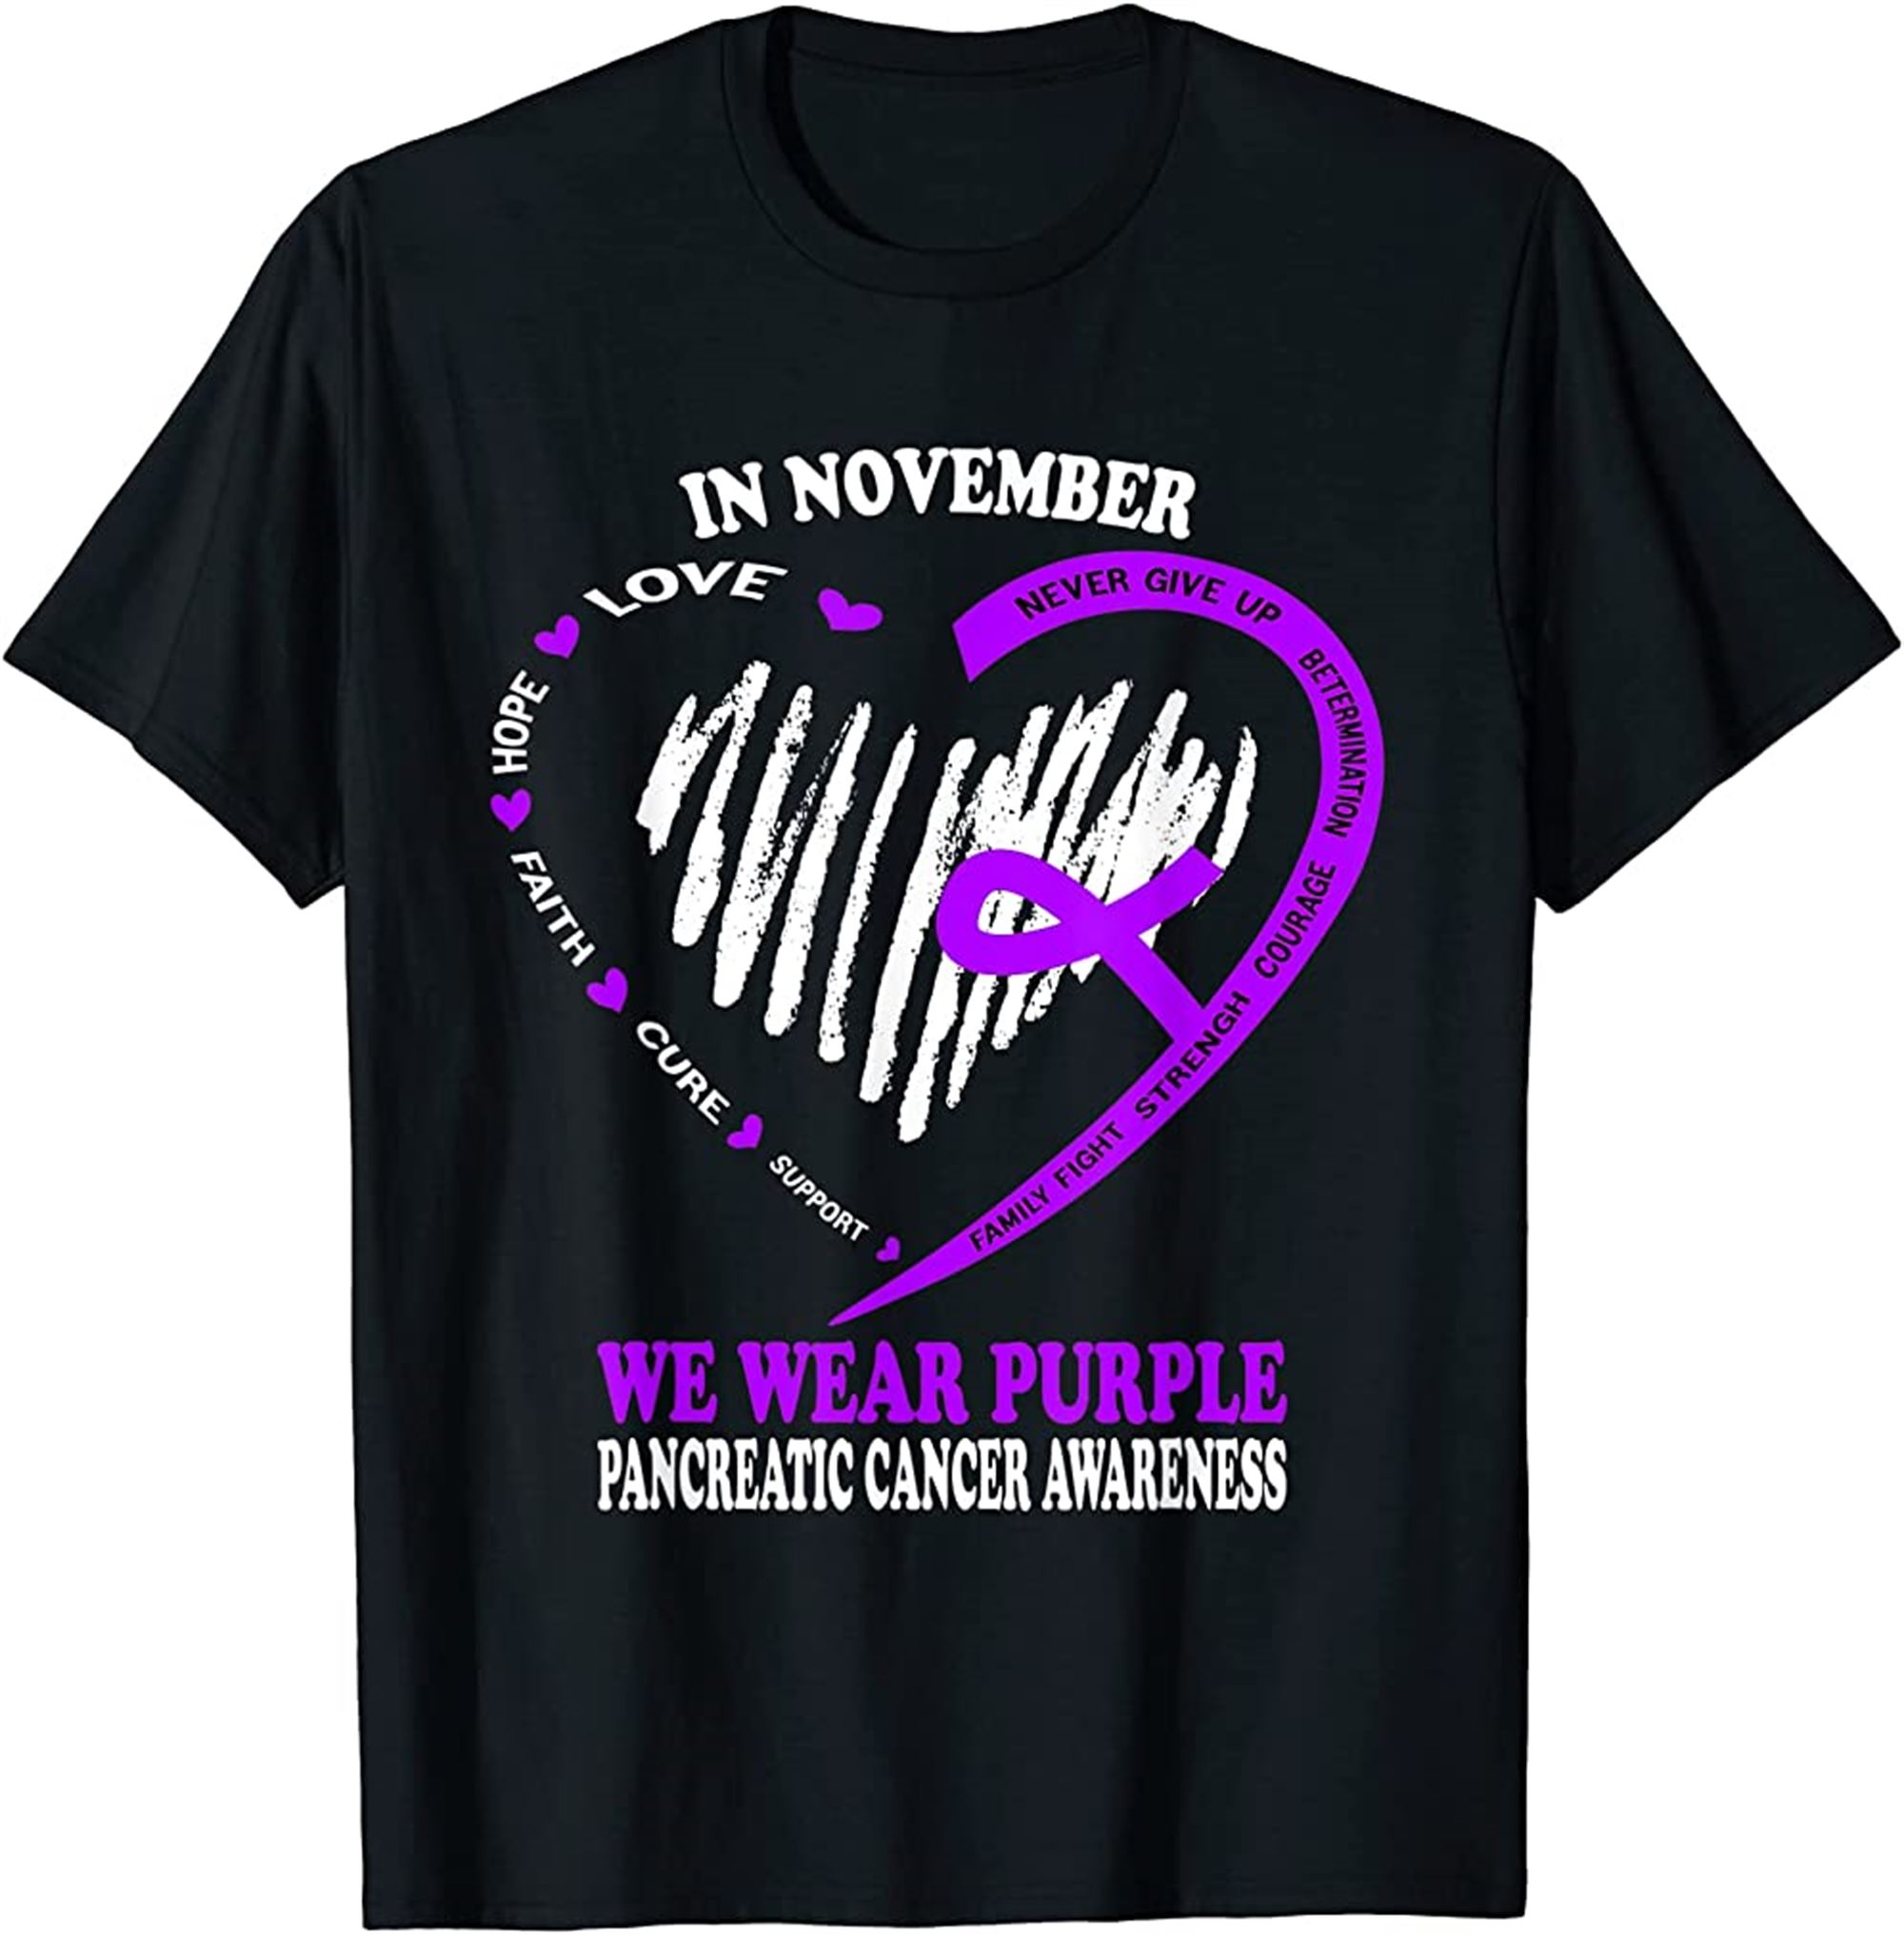 Pancreatic Cancer Awareness In November We Wear Purple T-shirt Size Up To 5xl